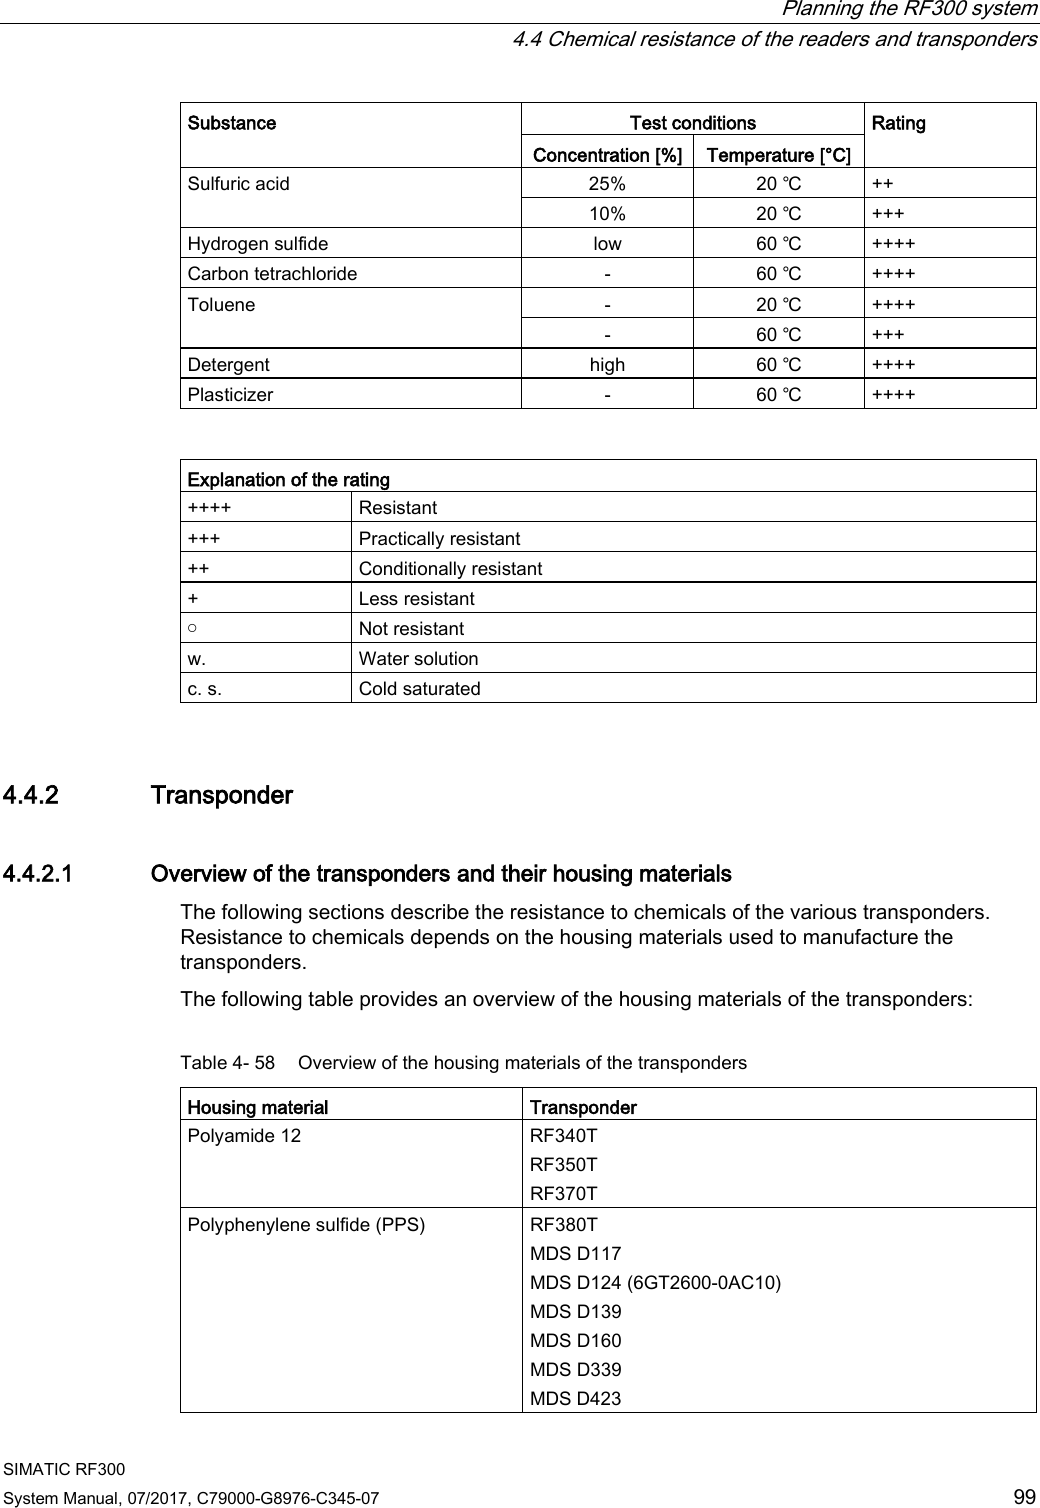  Planning the RF300 system  4.4 Chemical resistance of the readers and transponders SIMATIC RF300 System Manual, 07/2017, C79000-G8976-C345-07 99 Substance Test conditions Rating Concentration [%] Temperature [°C] Sulfuric acid 25% 20 ℃ ++ 10% 20 ℃ +++ Hydrogen sulfide low 60 ℃ ++++ Carbon tetrachloride - 60 ℃ ++++ Toluene - 20 ℃ ++++ - 60 ℃ +++ Detergent high 60 ℃ ++++ Plasticizer - 60 ℃ ++++   Explanation of the rating ++++ Resistant +++ Practically resistant ++ Conditionally resistant + Less resistant ￮ Not resistant w. Water solution c. s. Cold saturated 4.4.2 Transponder 4.4.2.1 Overview of the transponders and their housing materials The following sections describe the resistance to chemicals of the various transponders. Resistance to chemicals depends on the housing materials used to manufacture the transponders.  The following table provides an overview of the housing materials of the transponders: Table 4- 58 Overview of the housing materials of the transponders Housing material Transponder Polyamide 12 RF340T RF350T RF370T Polyphenylene sulfide (PPS) RF380T MDS D117 MDS D124 (6GT2600-0AC10) MDS D139 MDS D160 MDS D339 MDS D423 